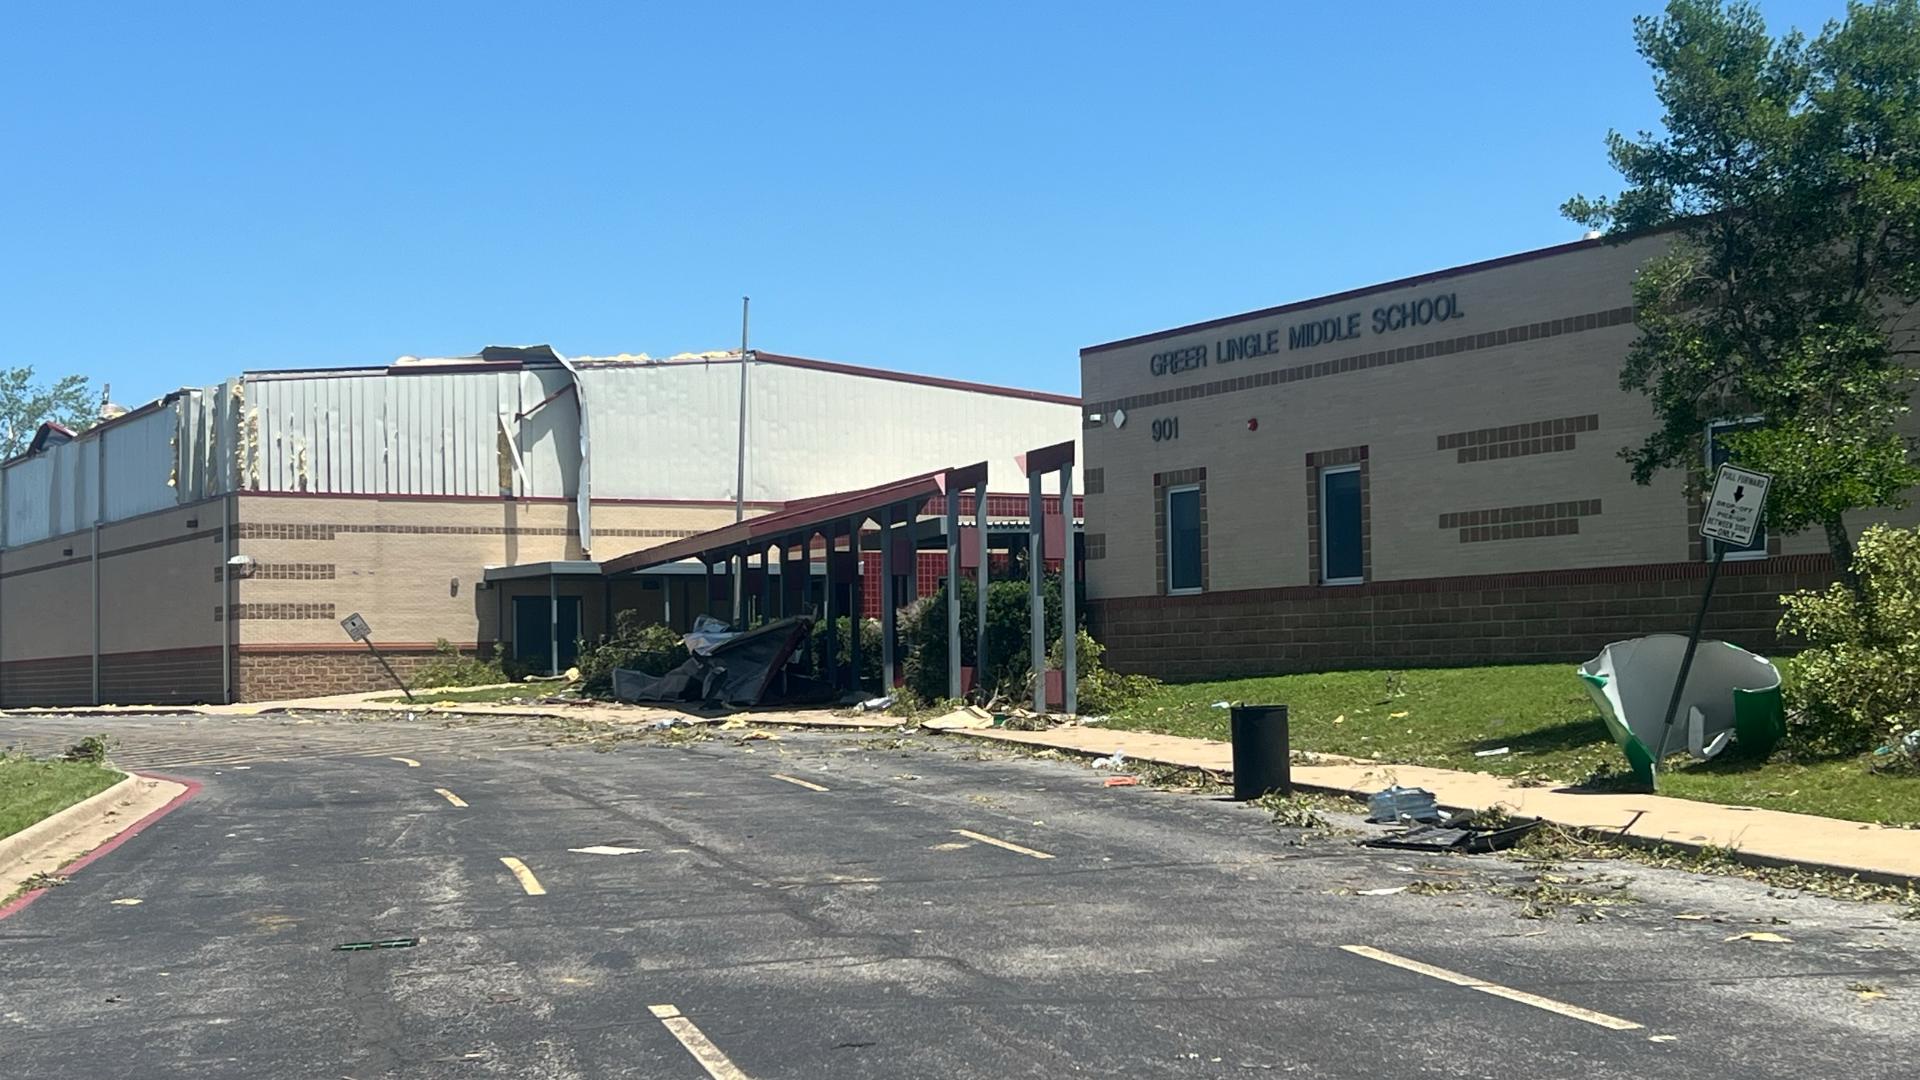 The superintendent says that the project to repair Greer Lingle doesn't yet have a price tag but will involve virtually redoing the school due to the damage.